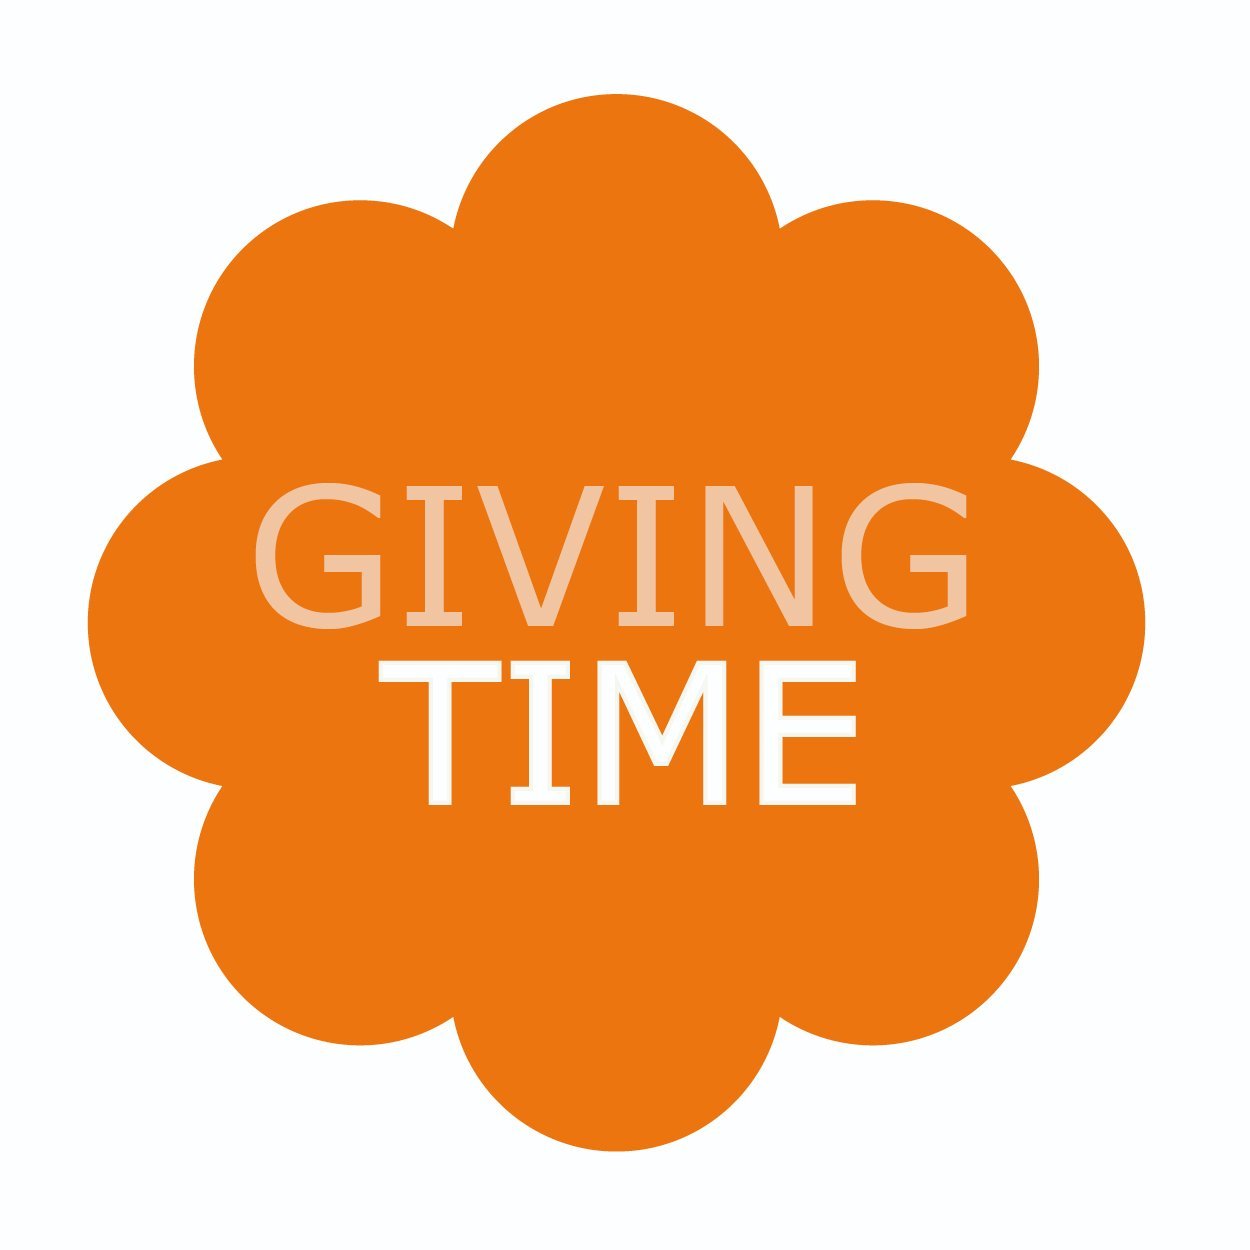 Giving Time is a project that supports people who have criminal convictions to access volunteering opportunities. A @VolActionLeeds project.